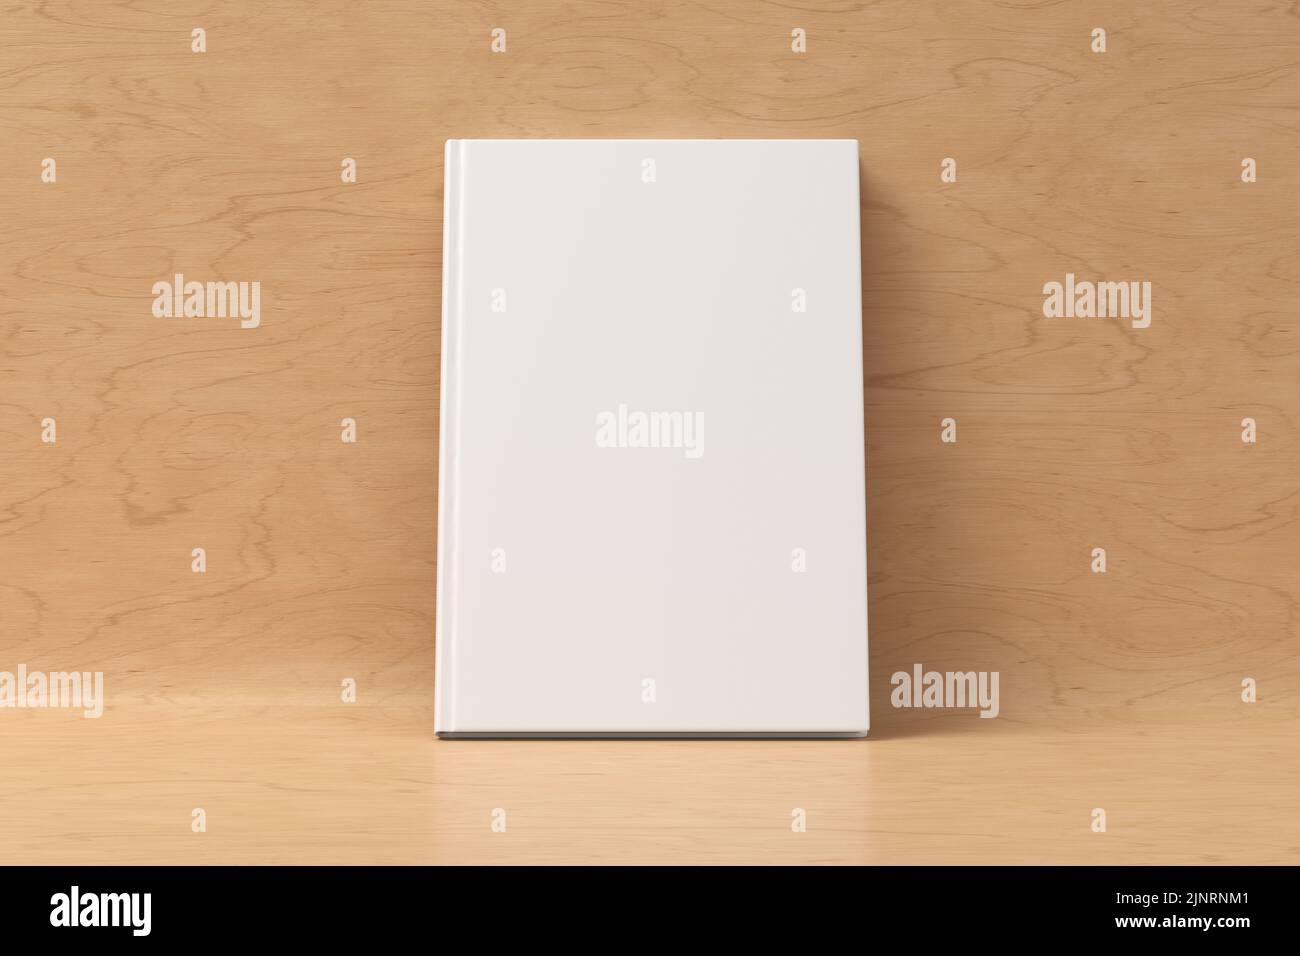 Blank vertical hardcover book cover mockup standing on wooden background. 3d render Stock Photo